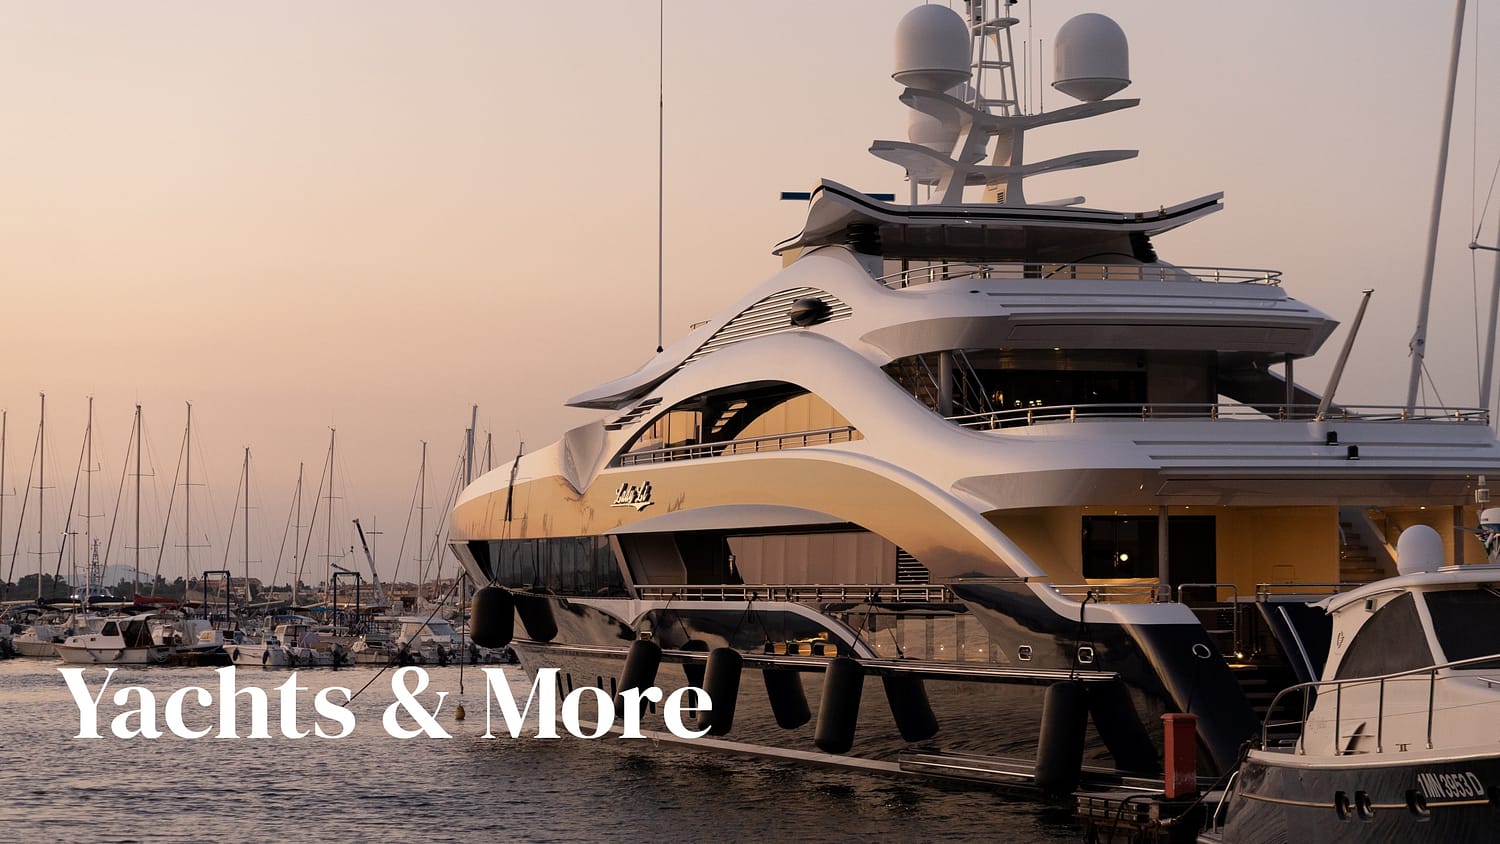 buy boats and yachts witch bitcoin or crypto in panama and latin america